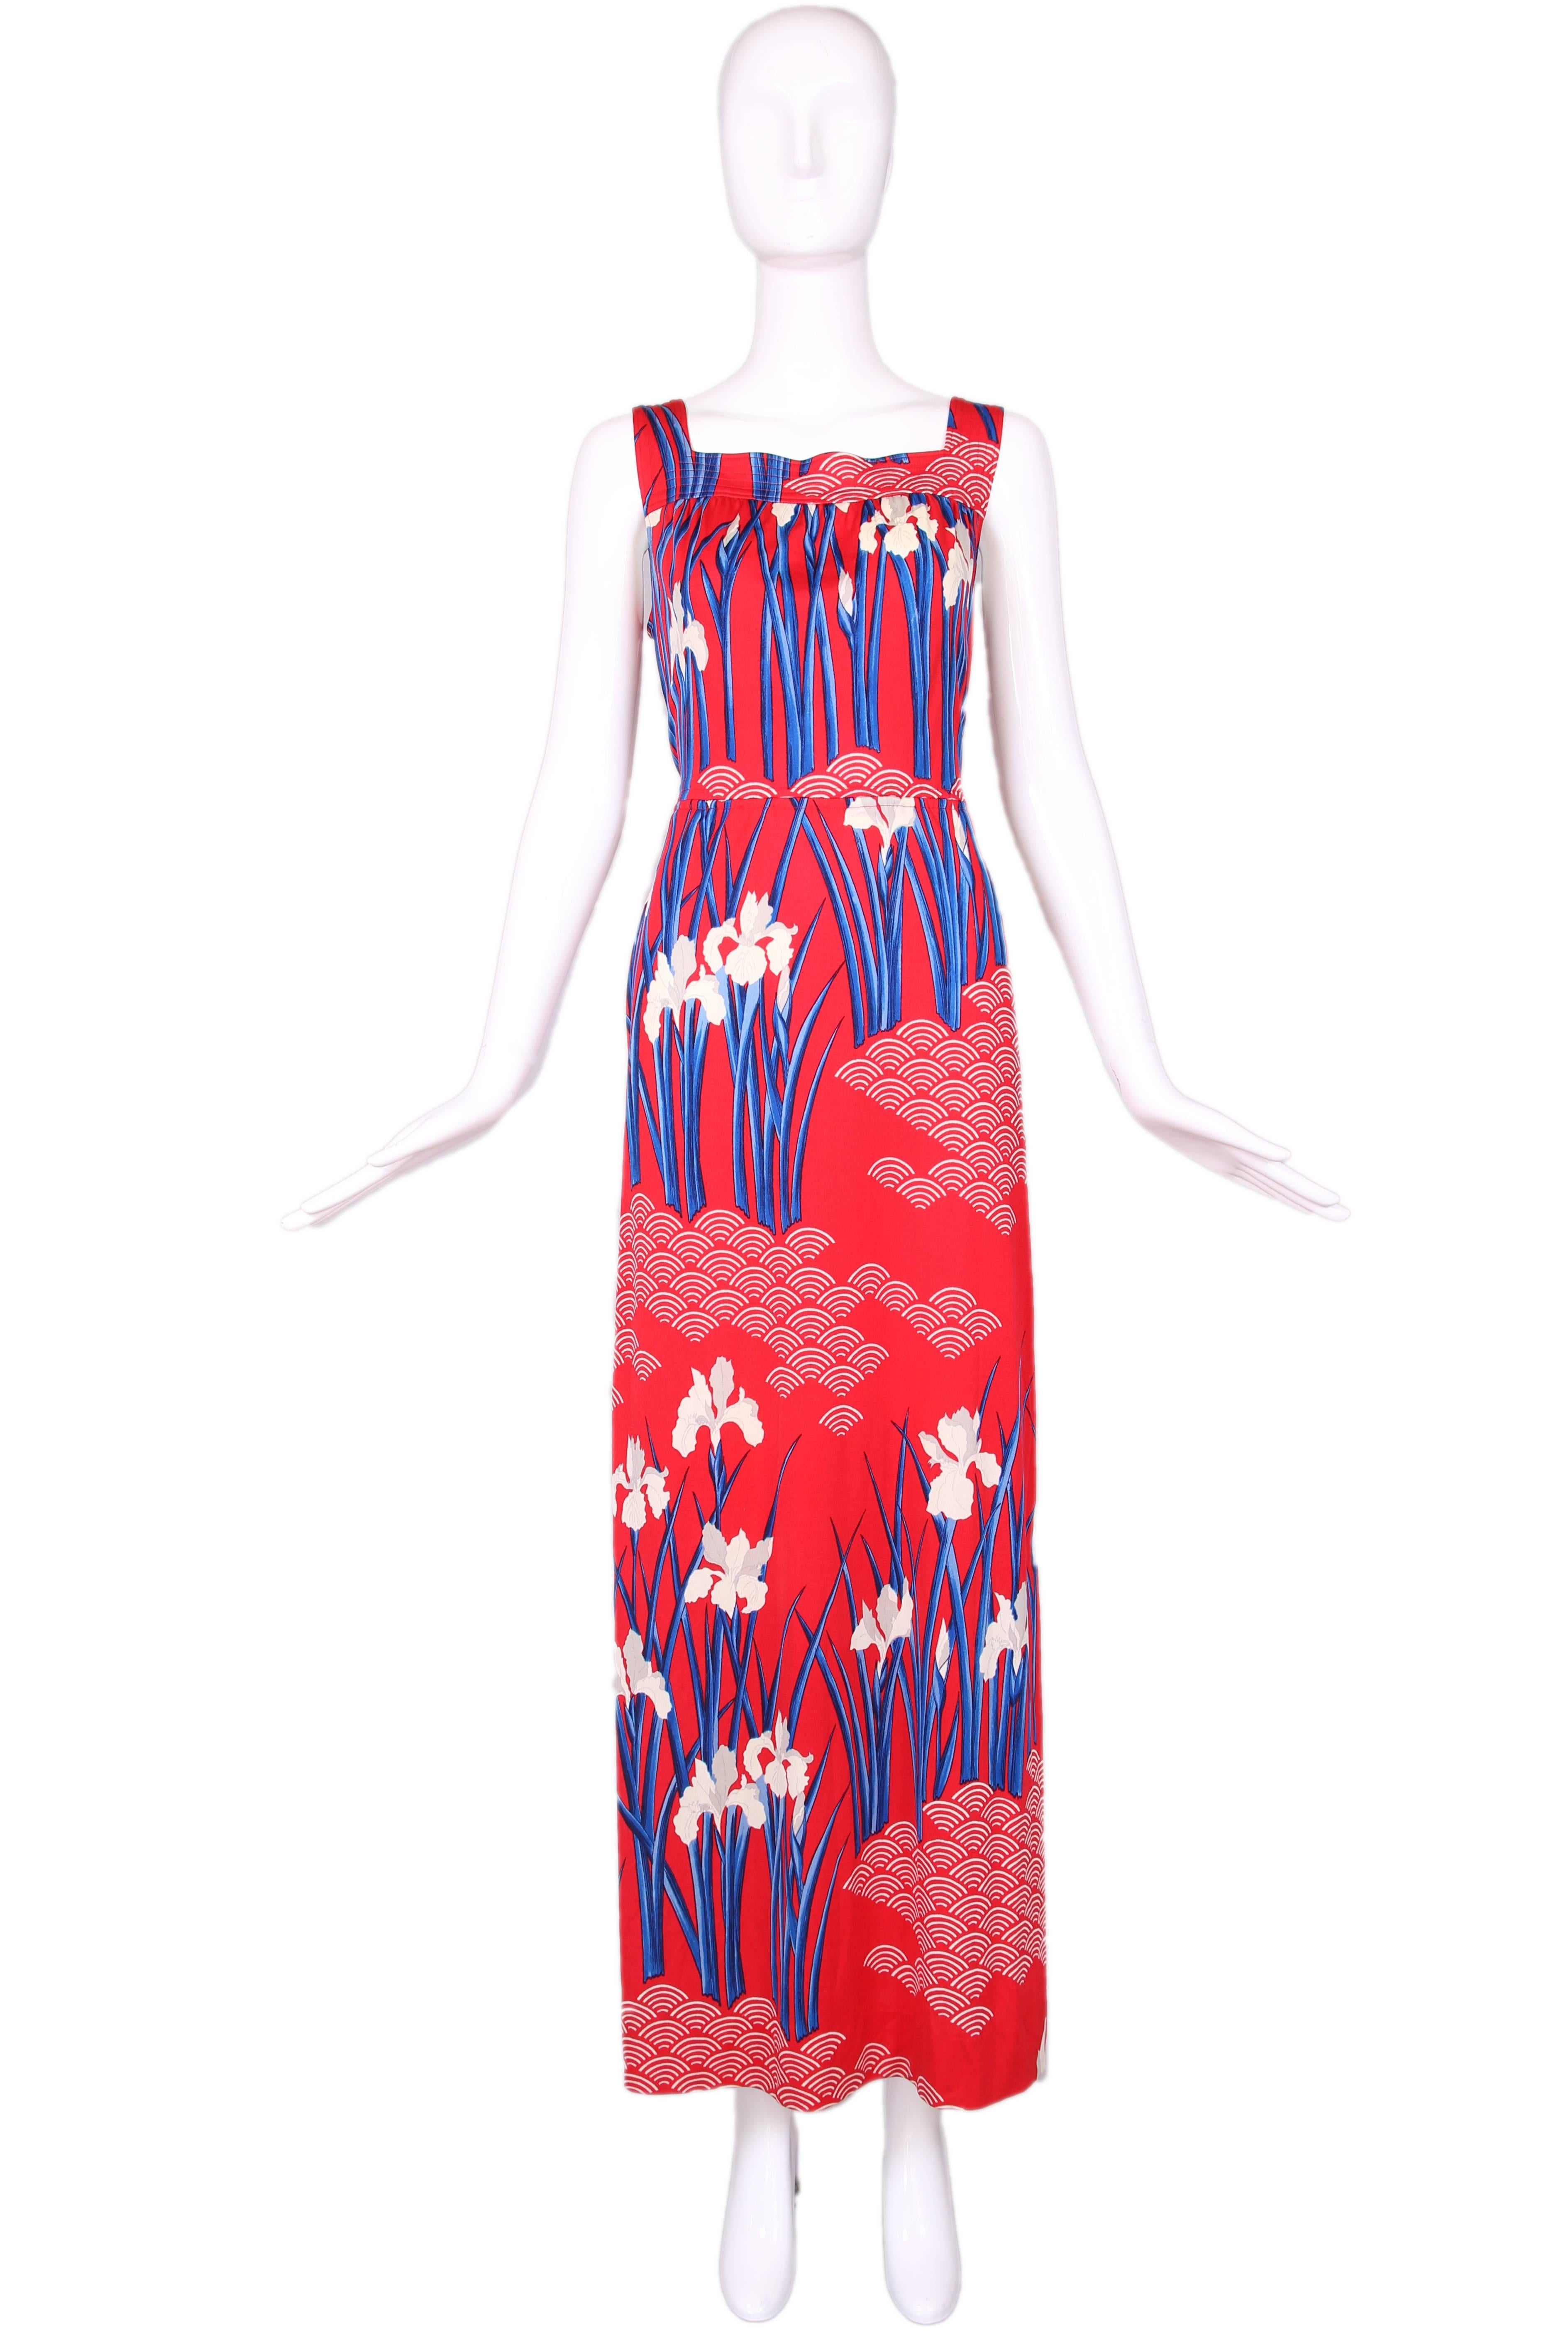 Hanae Mori red, blue, & white floral printed maxi dress. Size 10. In excellent condition, missing original belt.
MEASUREMENTS:
Bust - 36